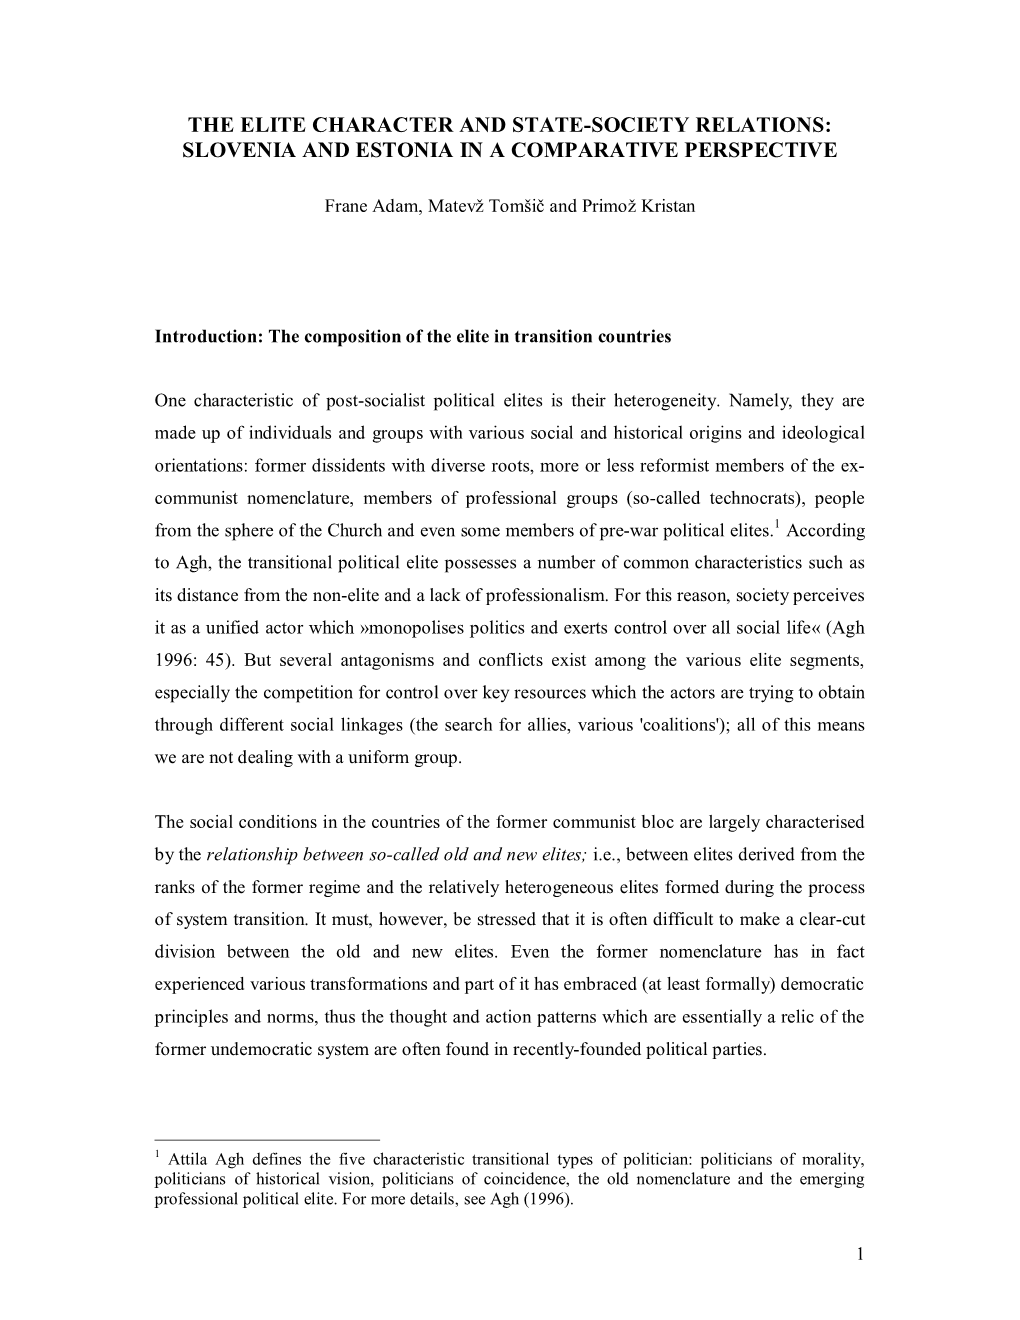 The Elite Character and State-Society Relations: Slovenia and Estonia in a Comparative Perspective